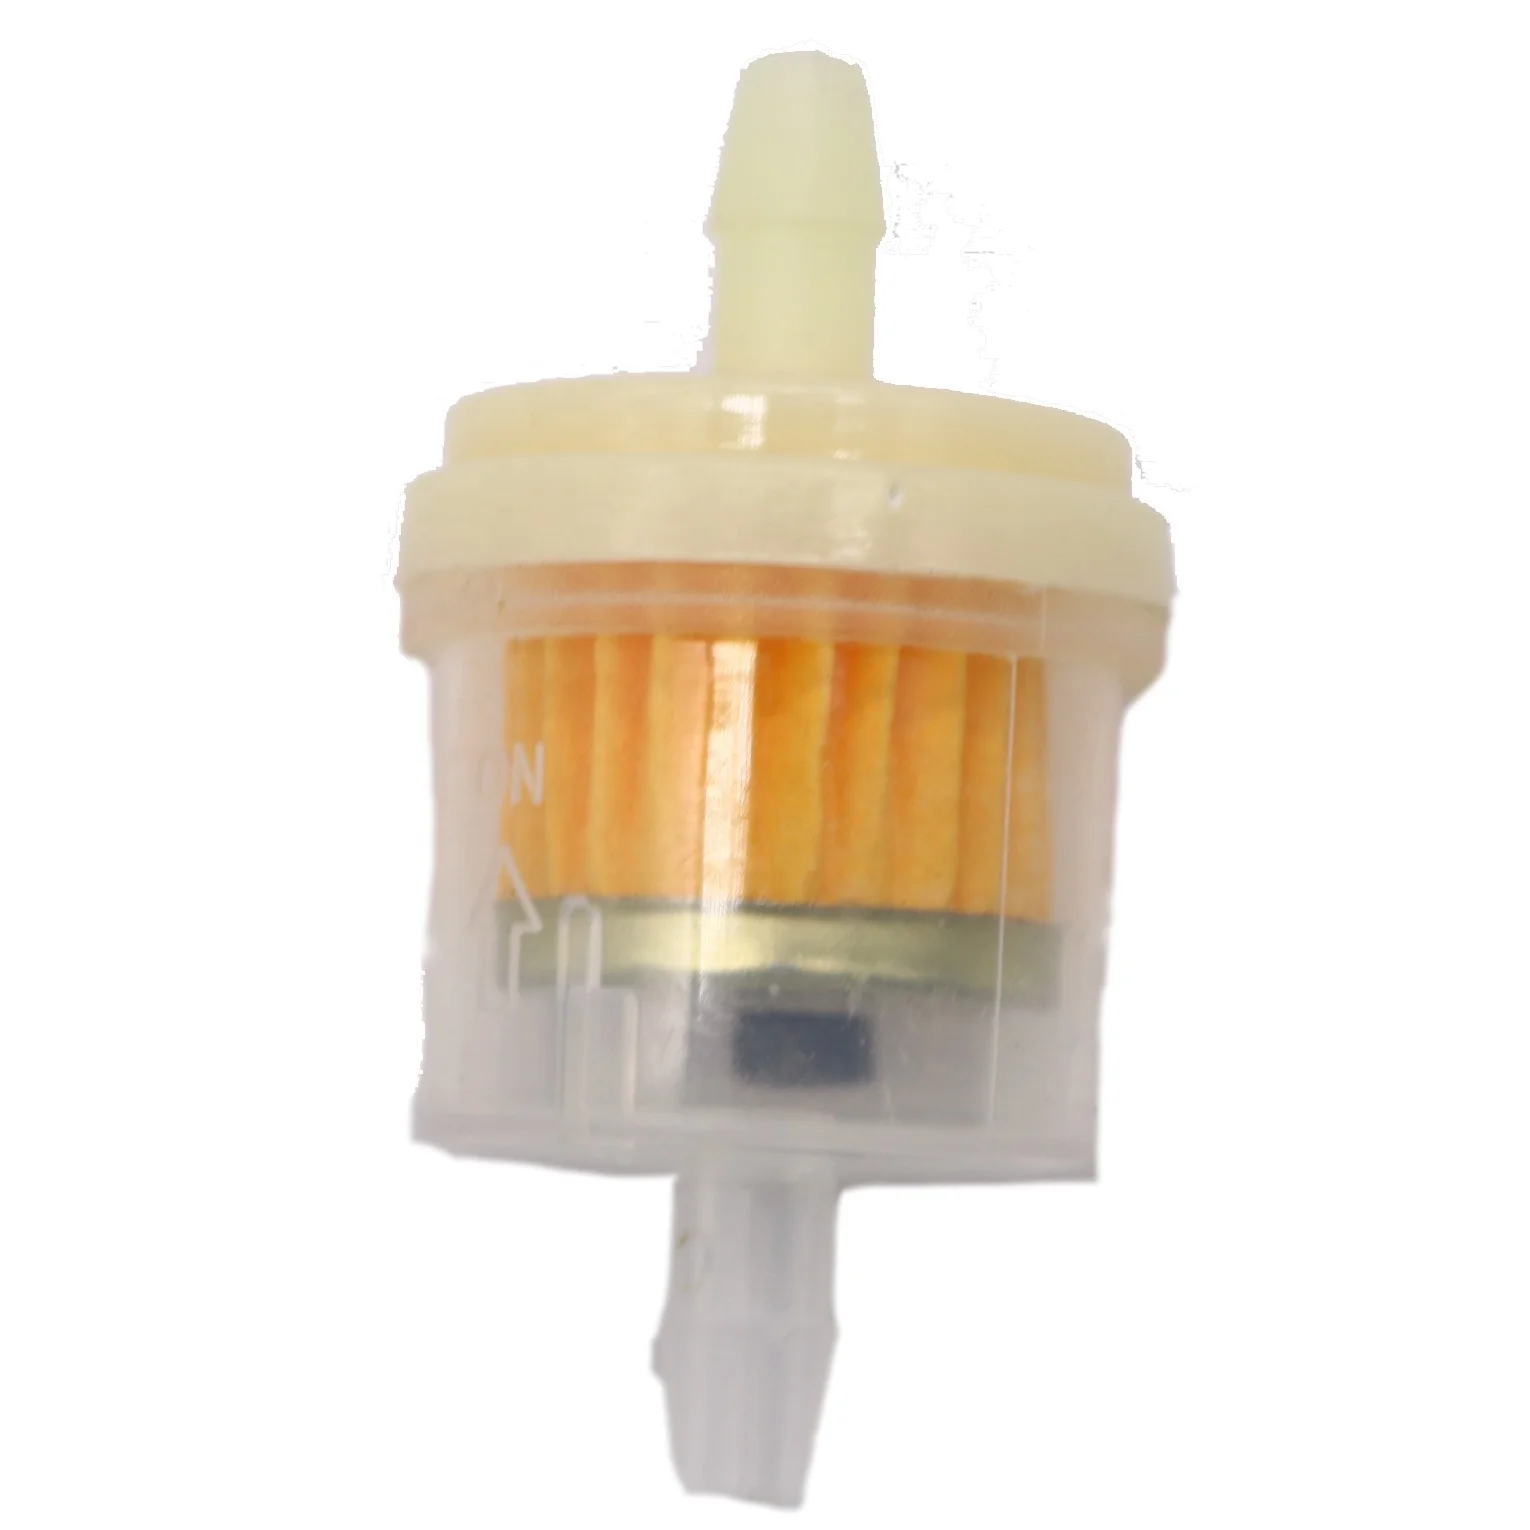 Wholesale Universal High Quality Motorcycle Fuel Filter - Buy High Quality,Motorcycle Fuel